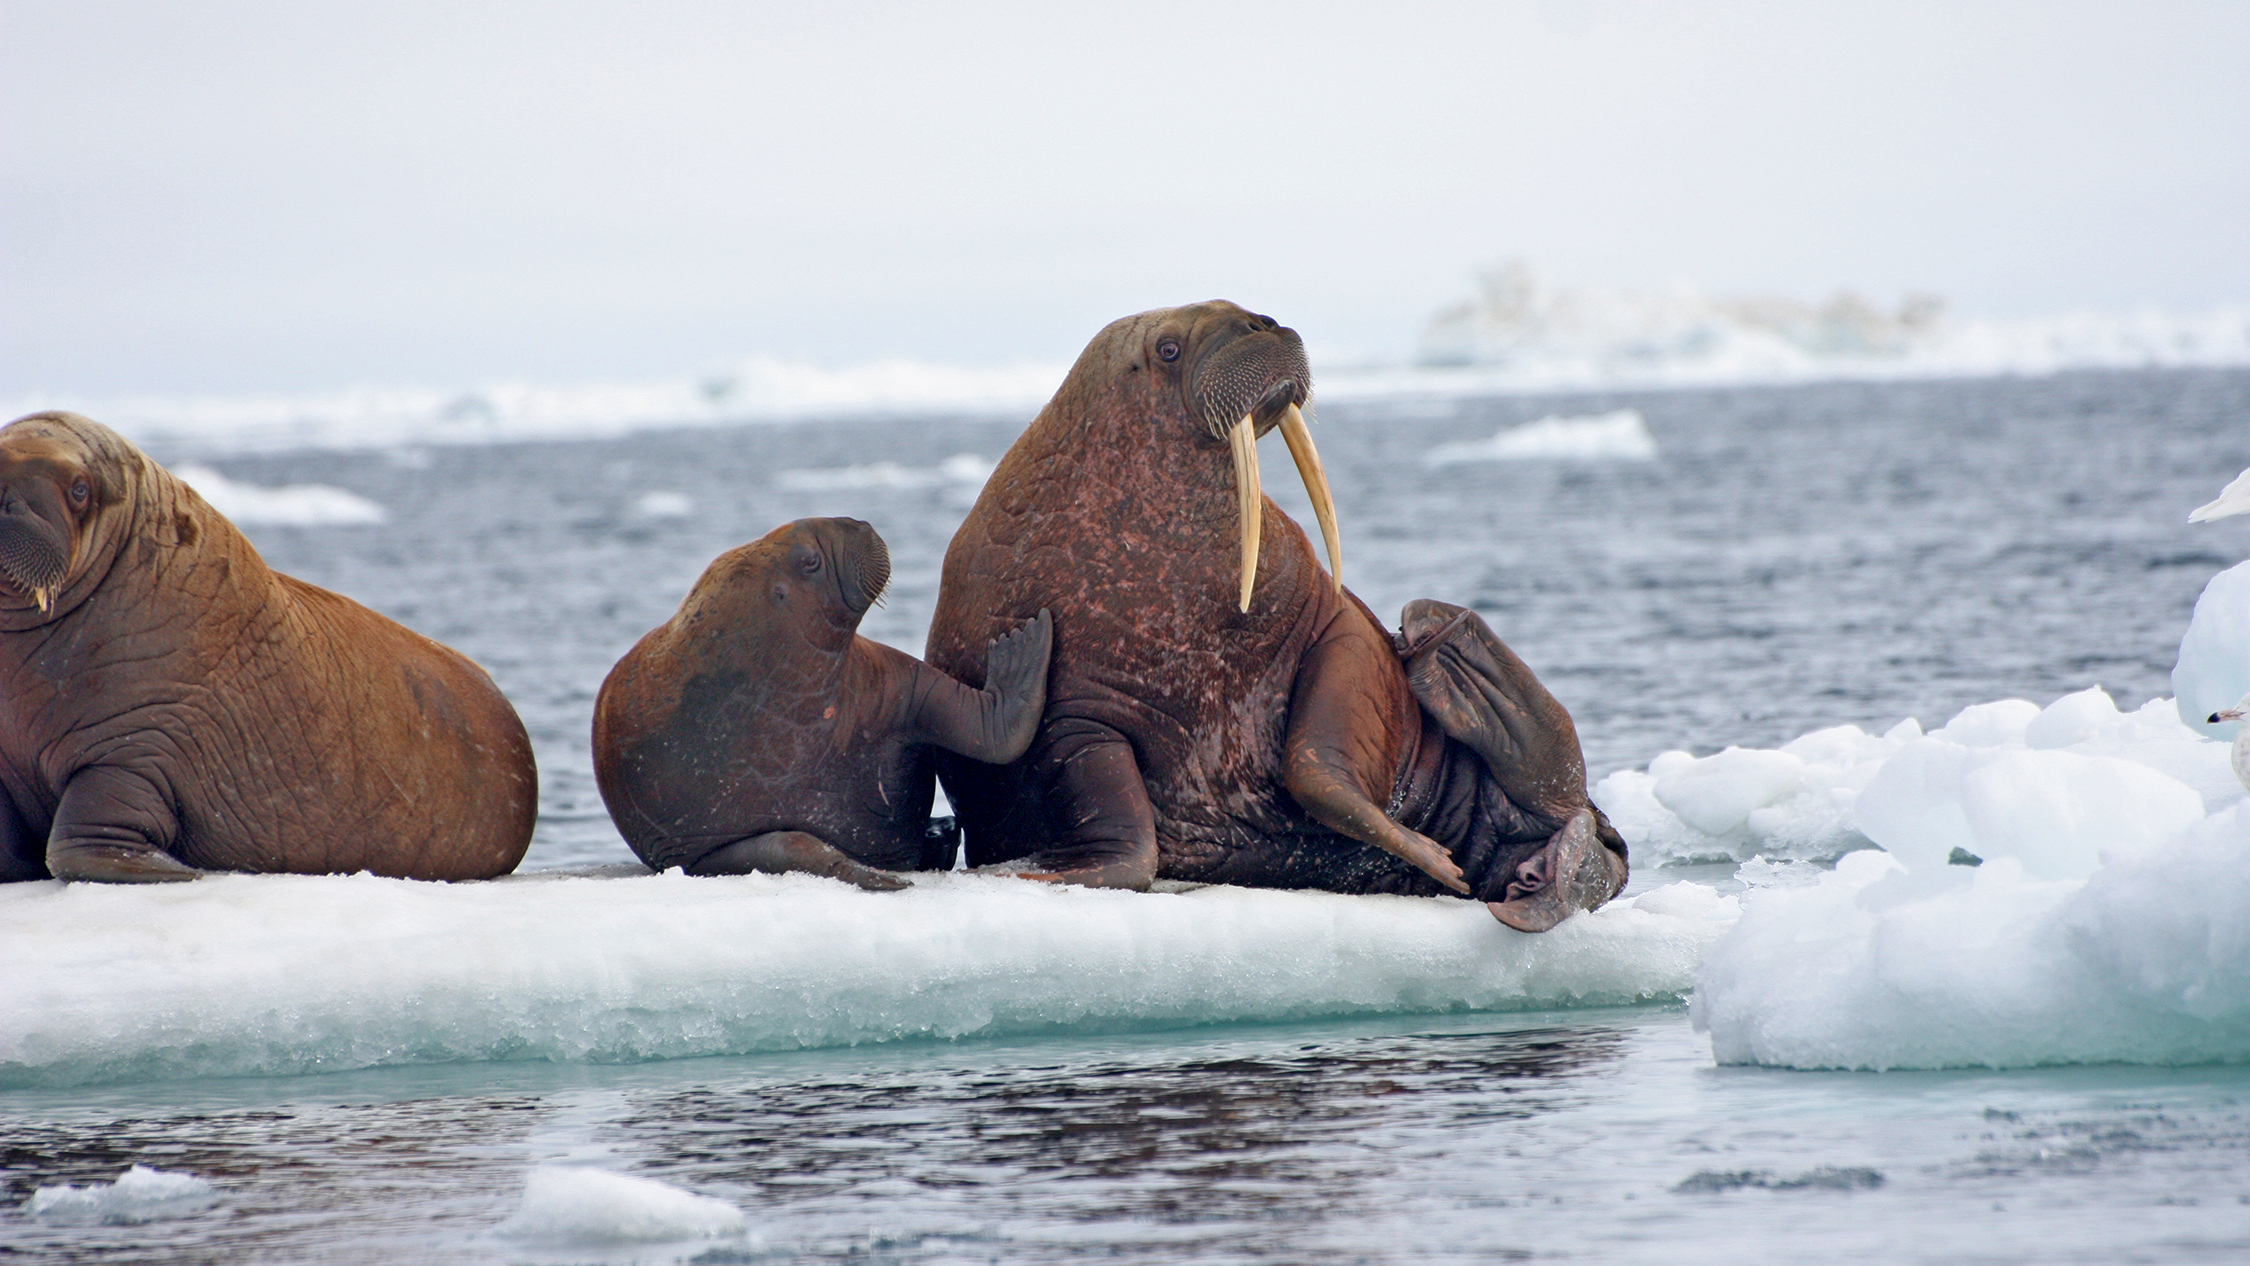 Areas such as the Hanna Shoal in the Chukchi Sea are essential habitat for walruses, which rest in family groups between foraging and migrating.